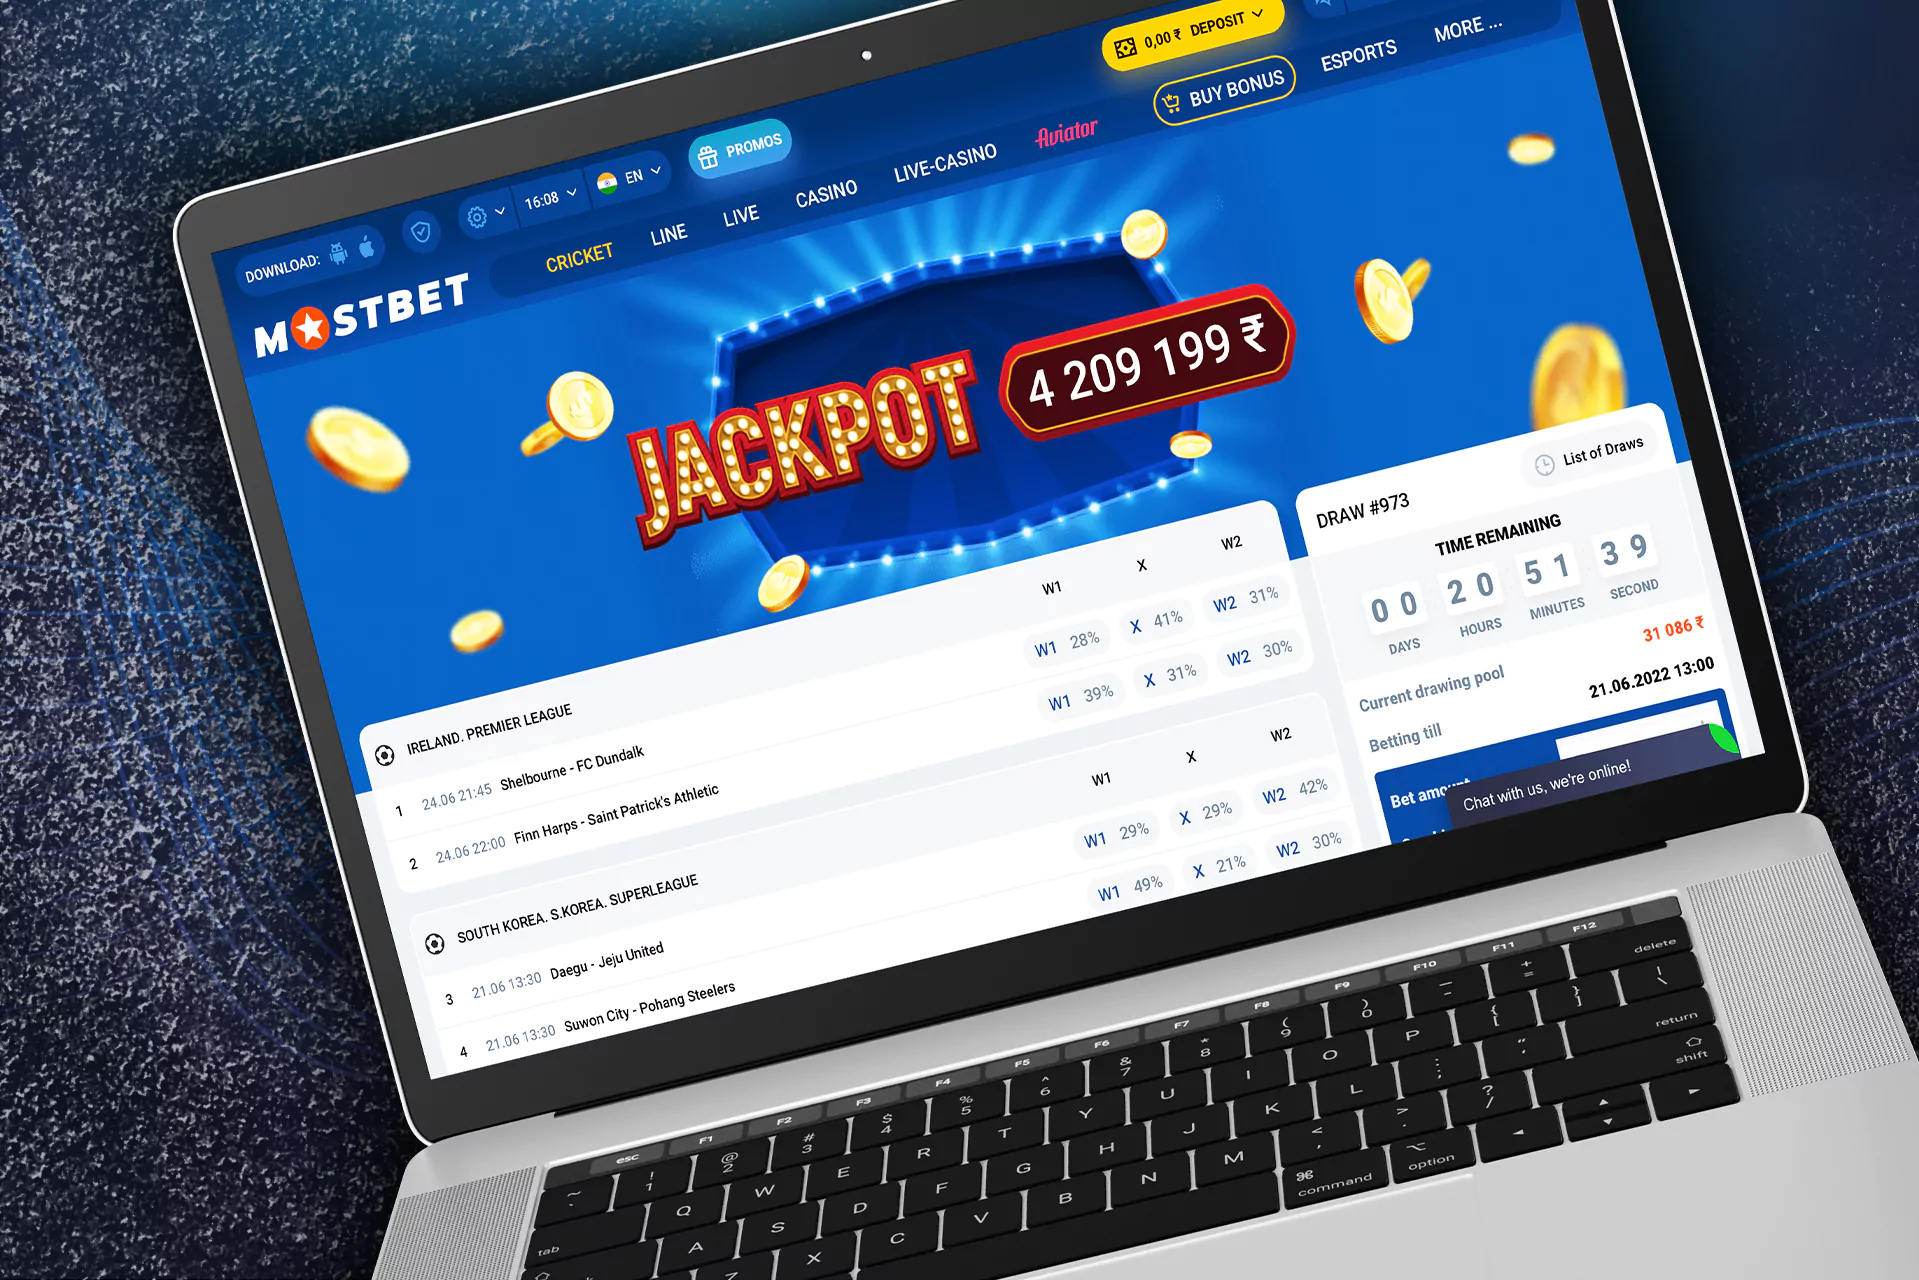 Toto with jackpot up to 4,209,199 indian rupees.